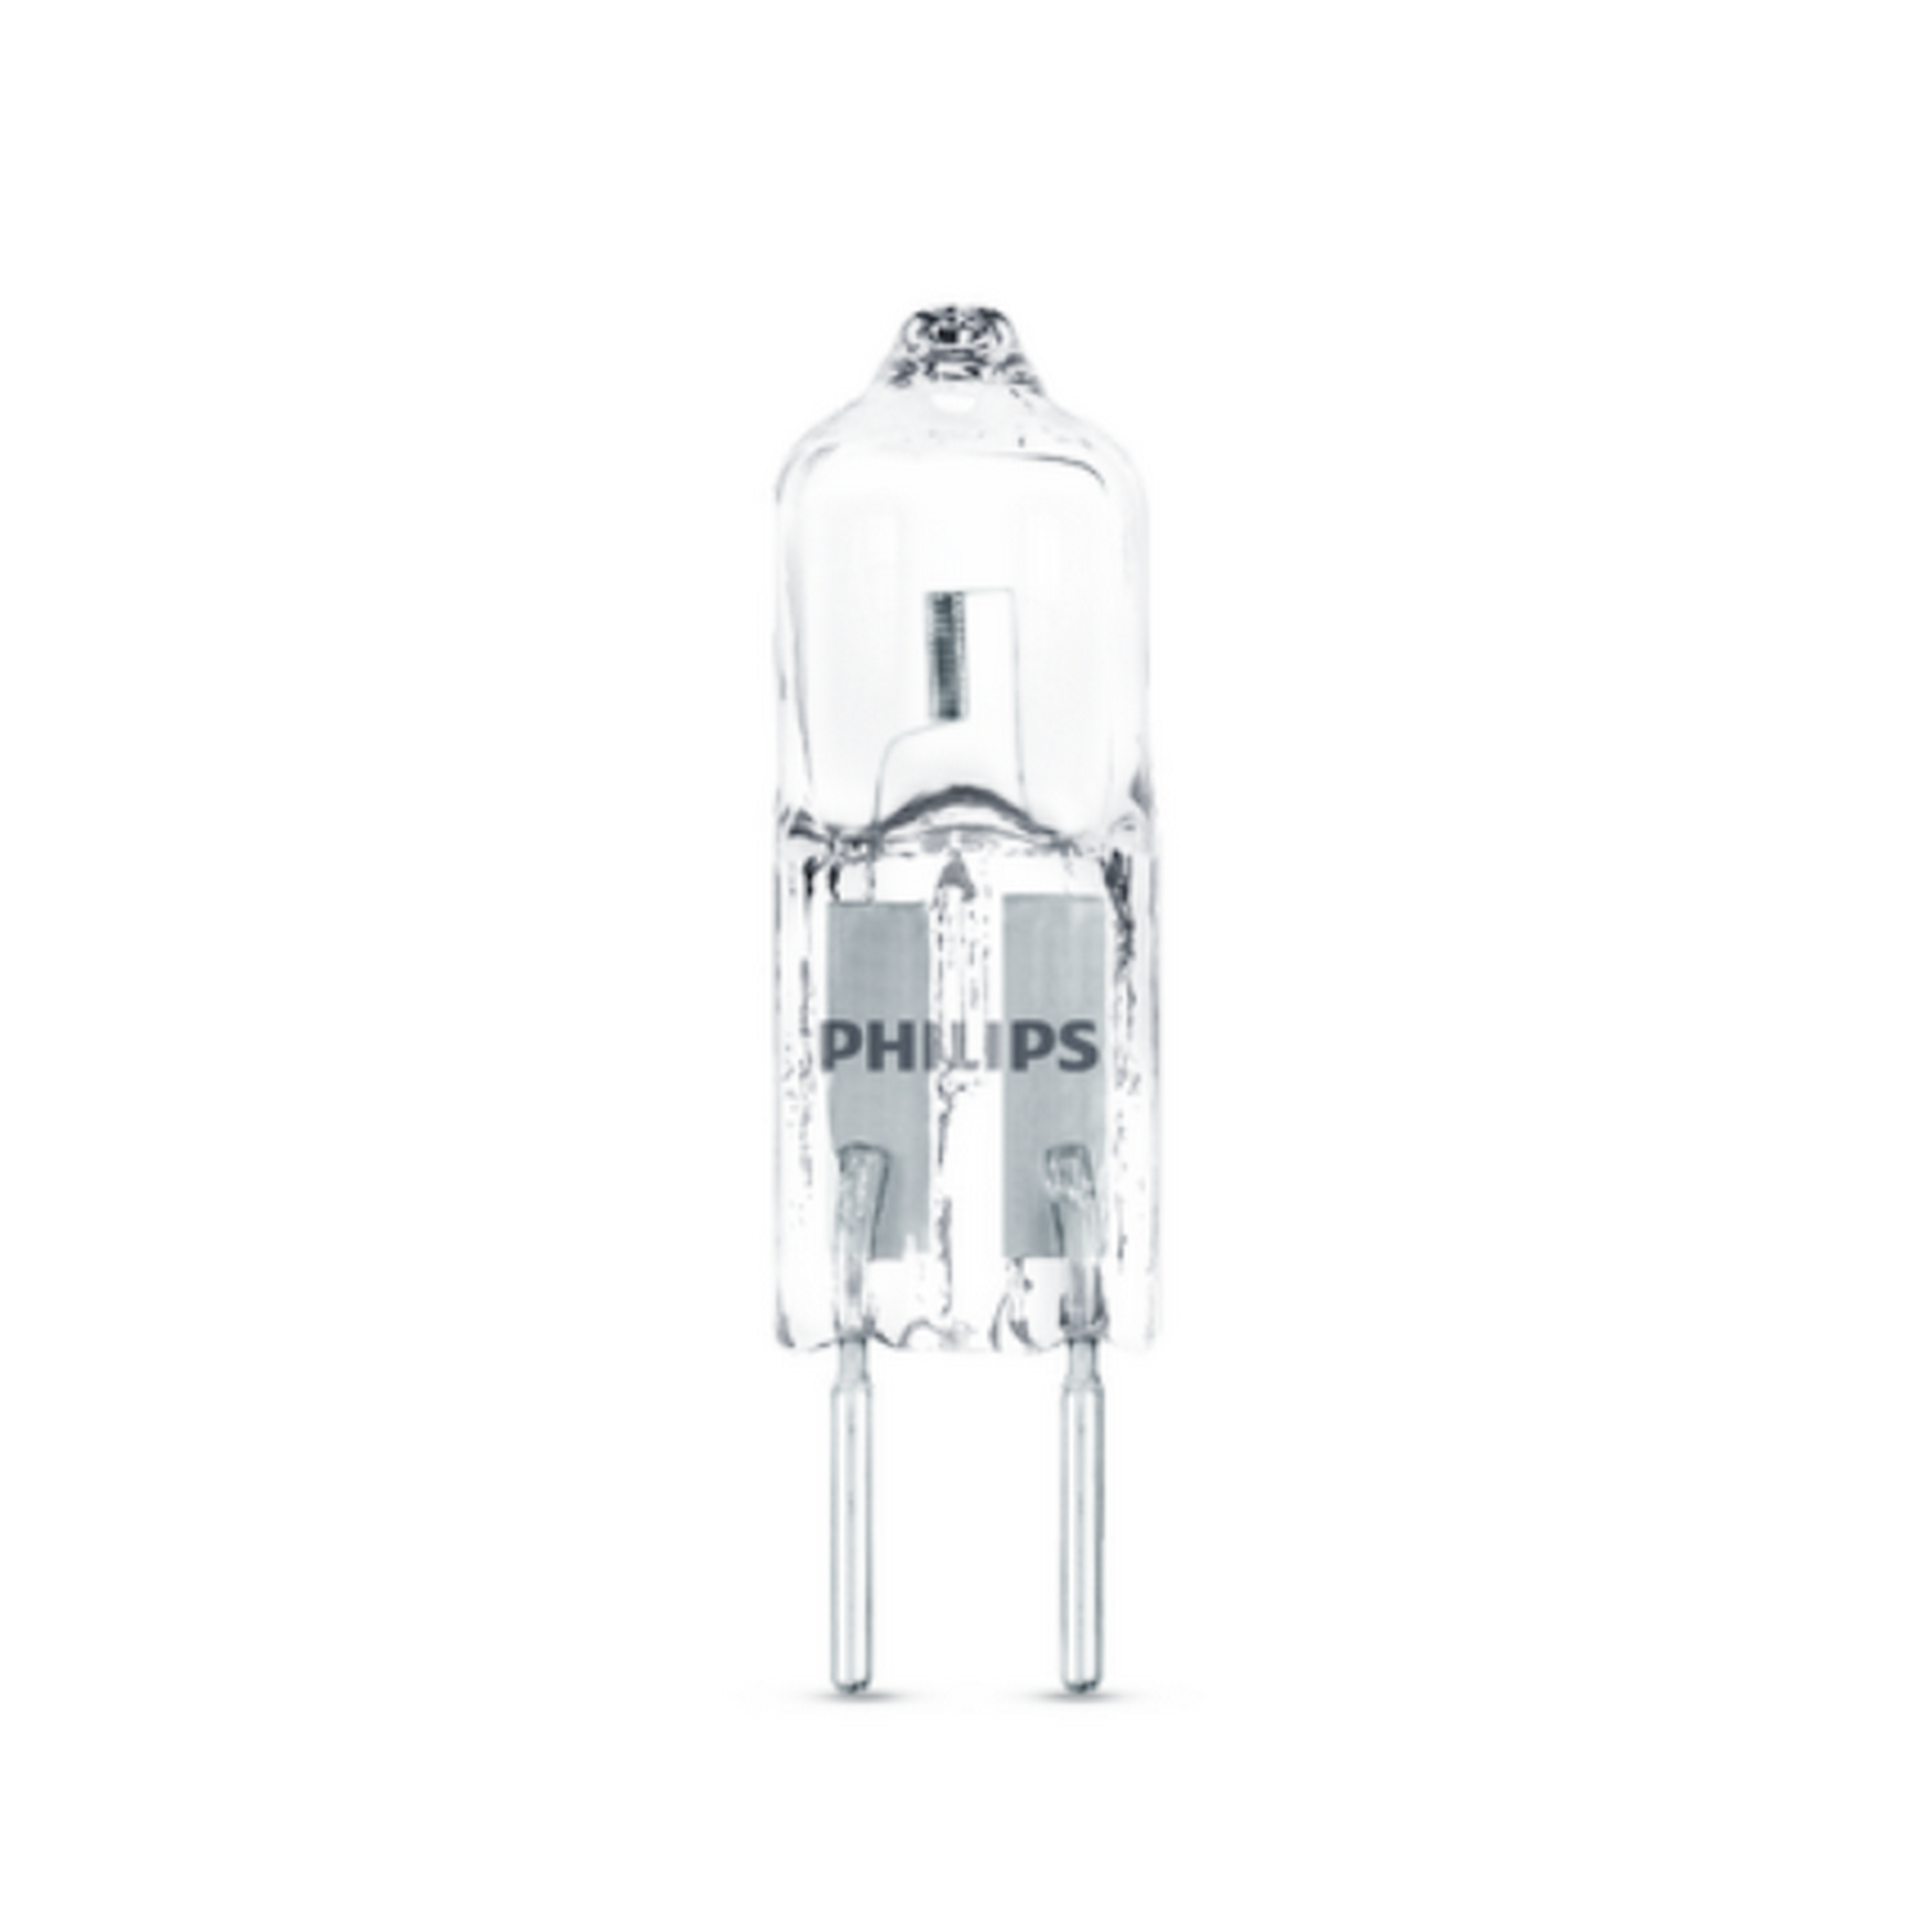 Halogenbrenner GY6.35 766 lm transparent dimmbar + product picture